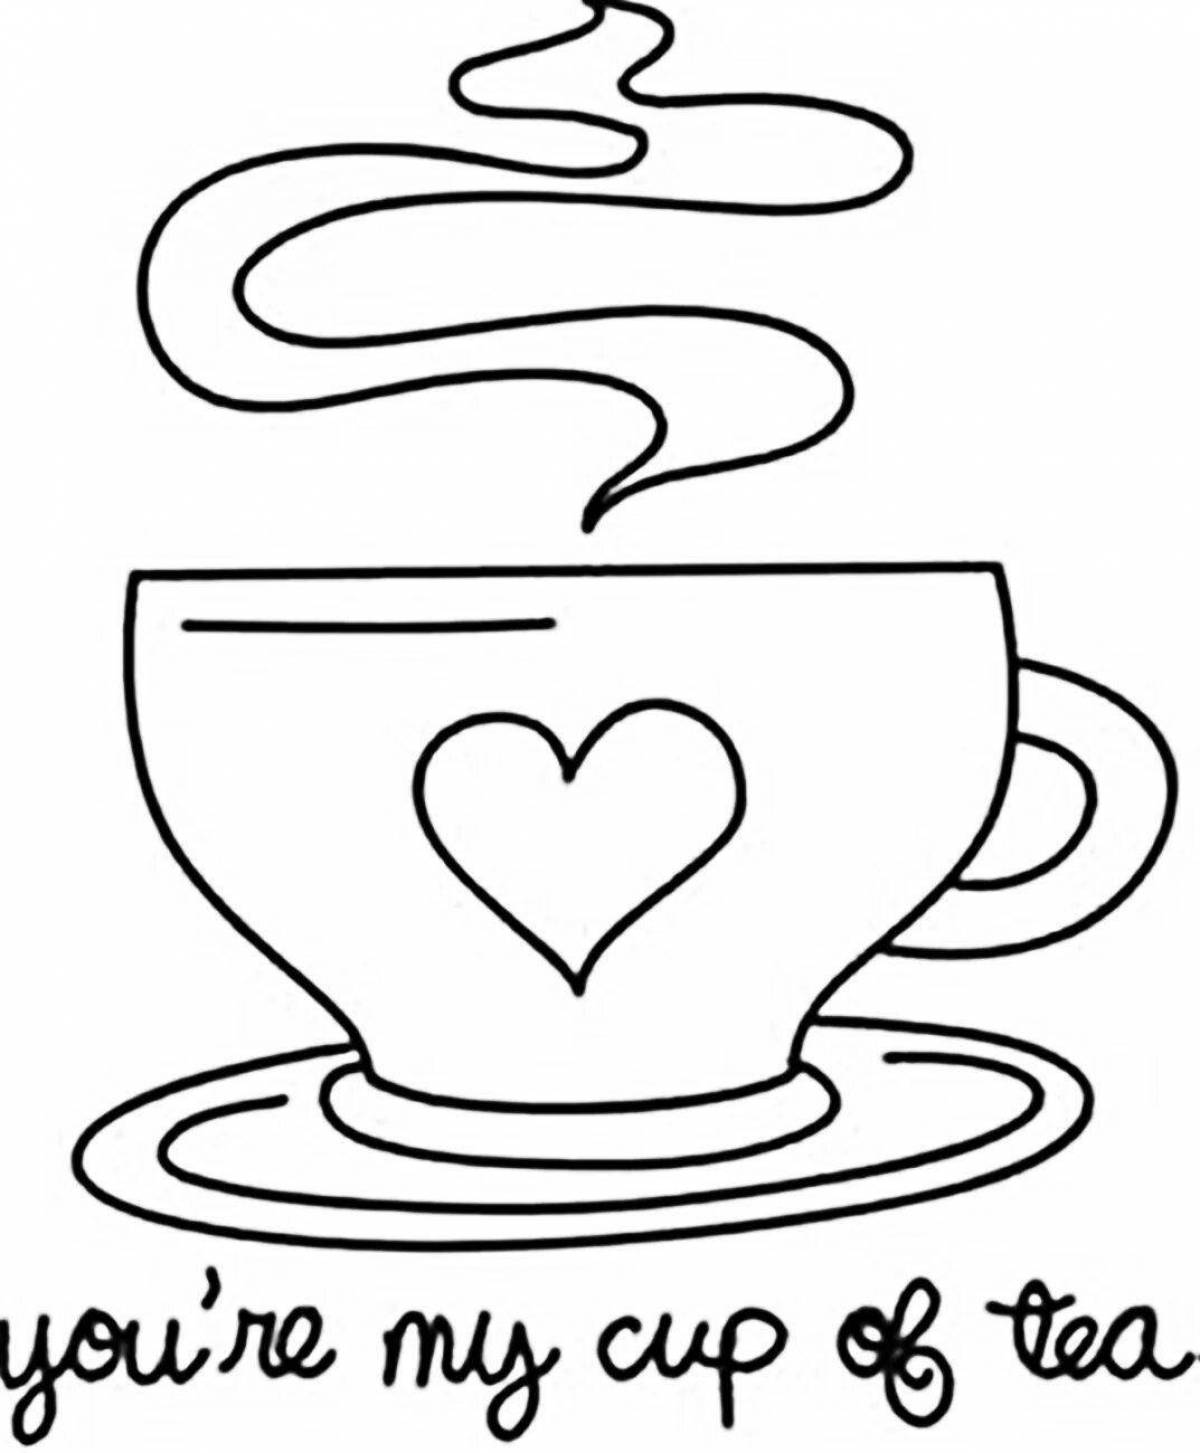 A wonderful template for a cup and saucer application